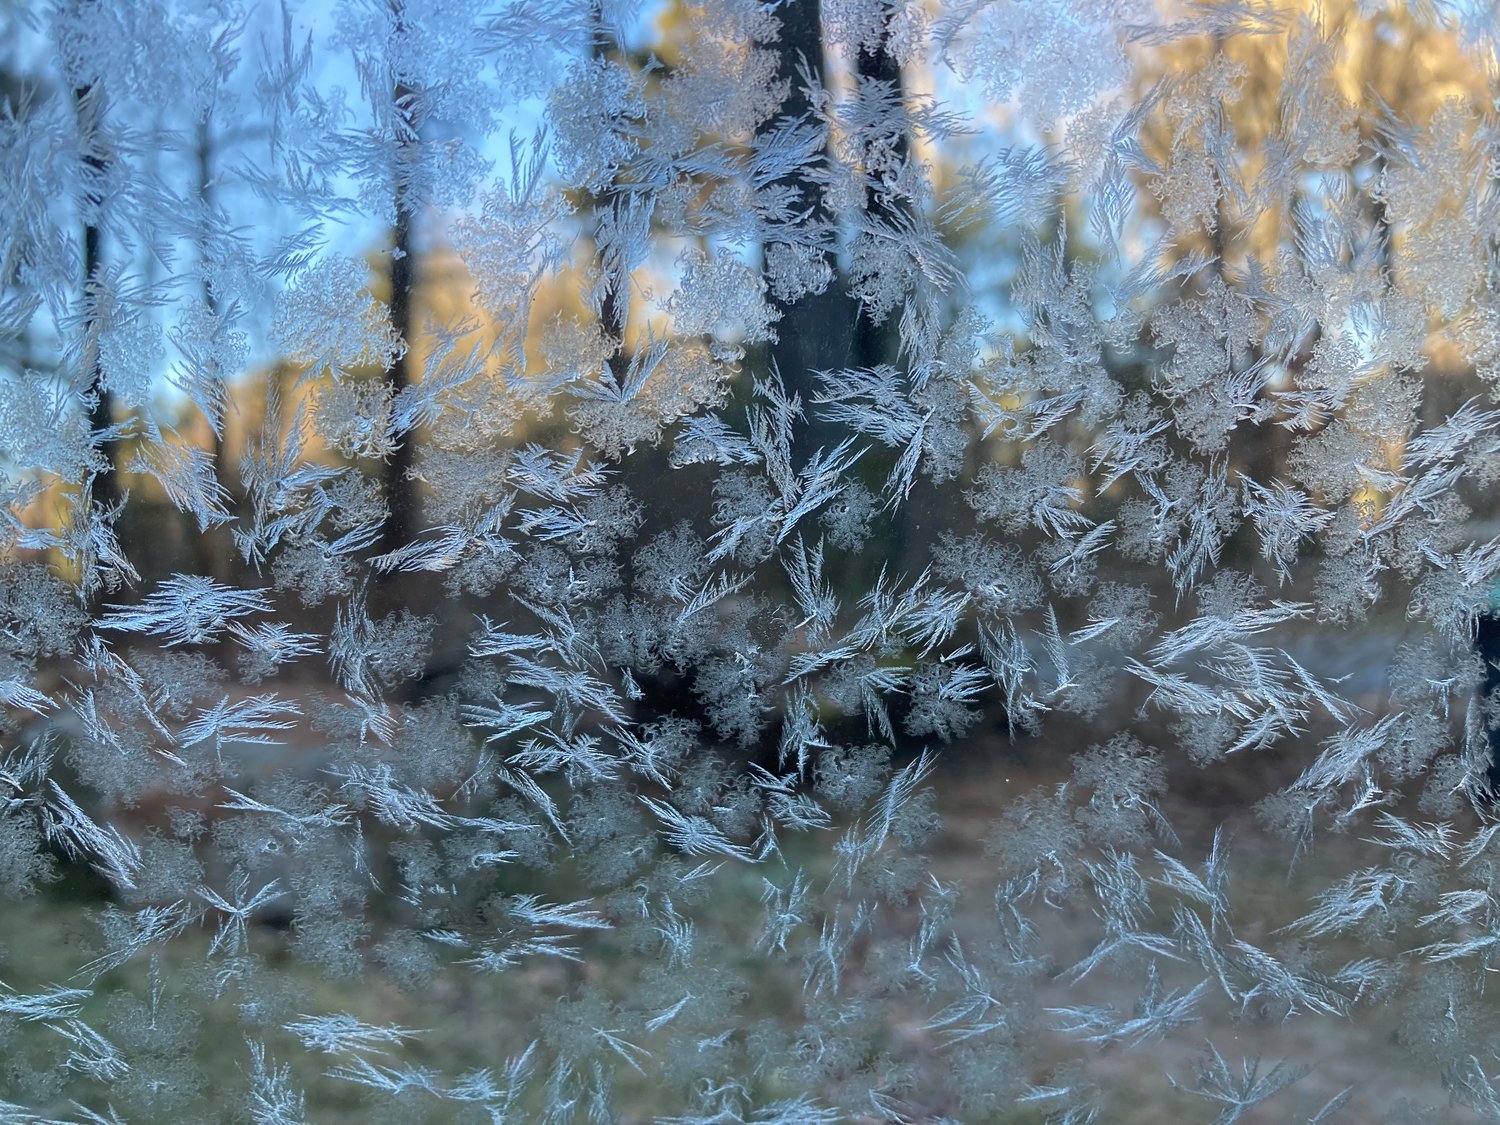 A closer look at the delicate beauty of the frost formations on my car window. This type of frost forms when water vapor condenses on the cold glass.